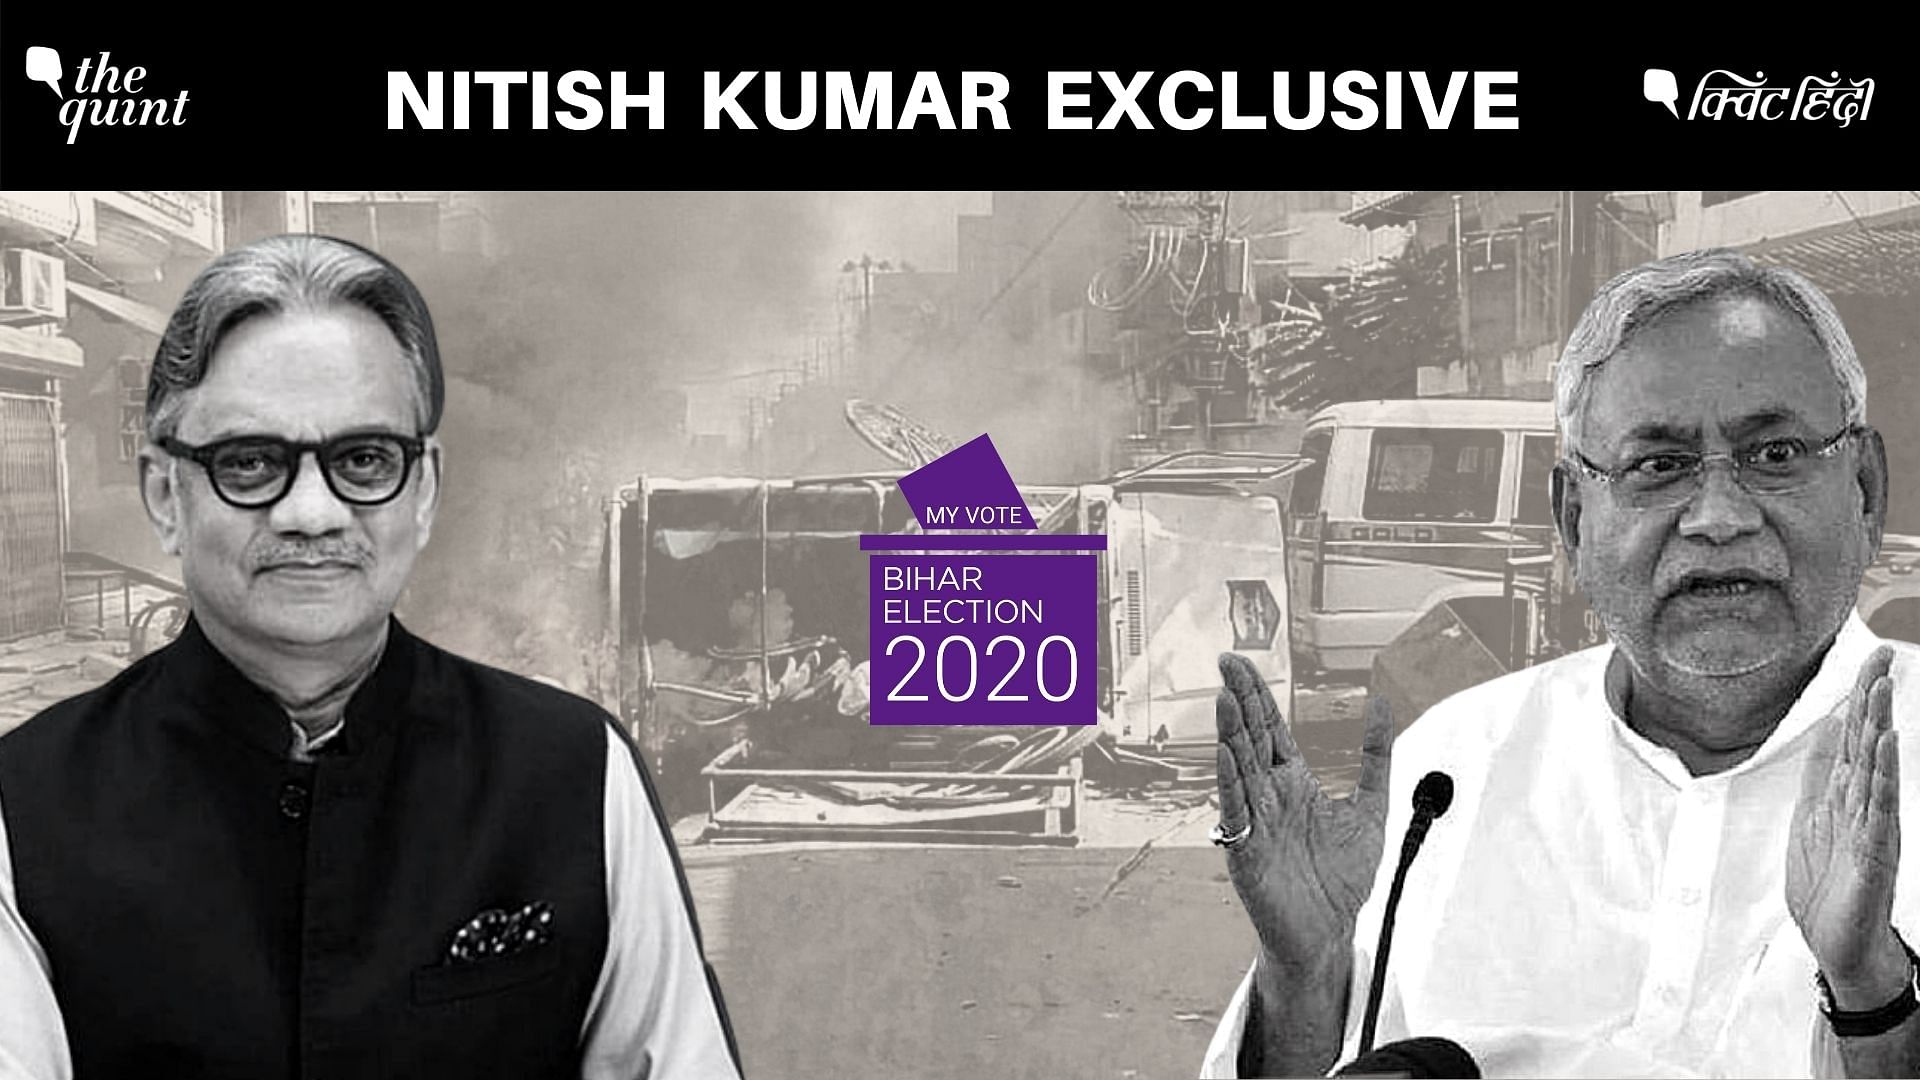 Bihar Chief Minister Nitish Kumar on Sunday, 1 November commented on the Munger unrest in an exclusive conversation with The Quint’s Editorial Director Sanjay Pugalia and said that it was a one-off incident that will not have any political repercussions.